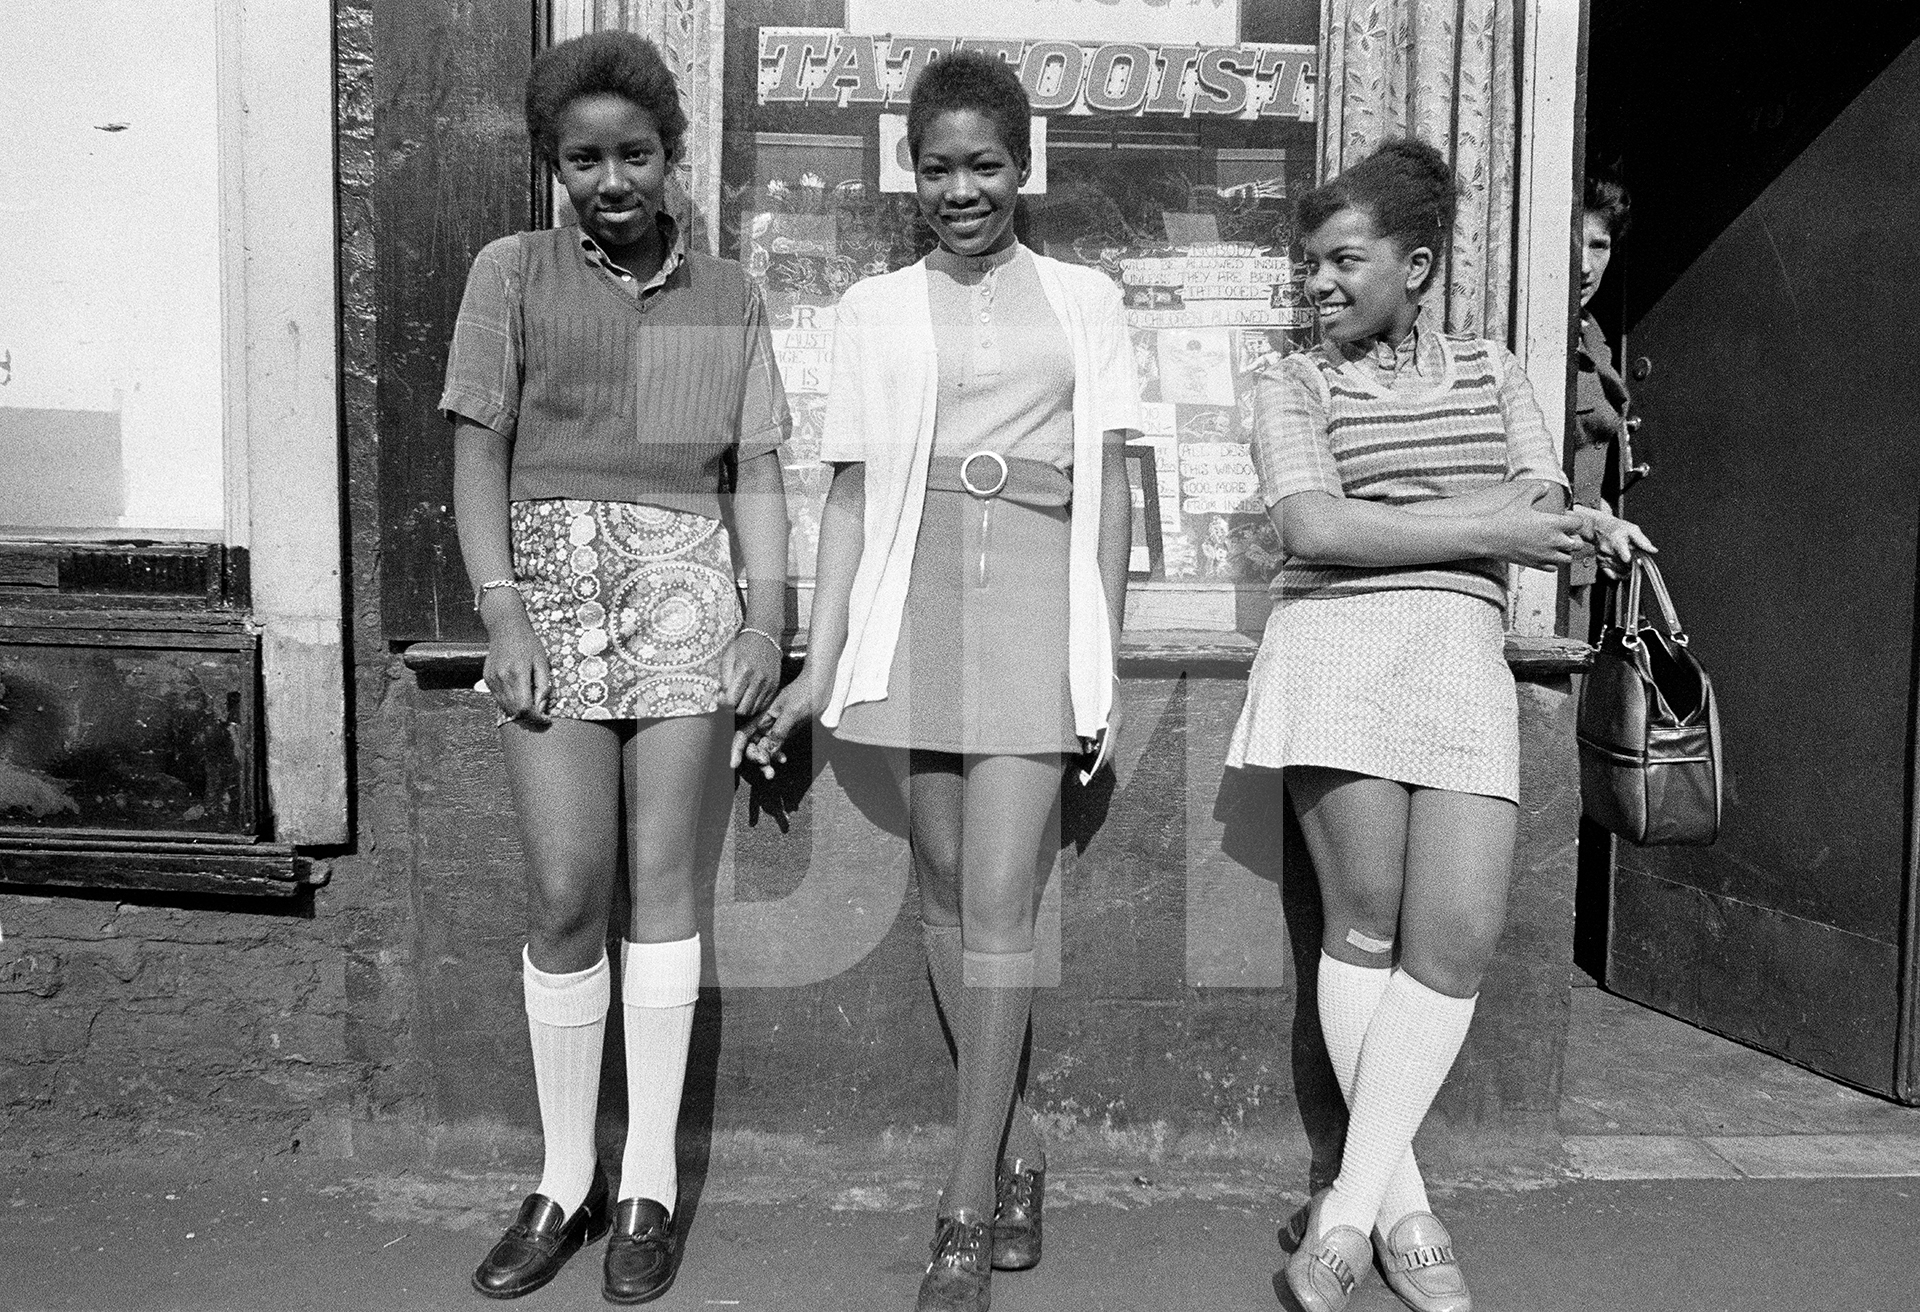 Left Joanne McKenzie, middle Donna Duncan. Teenagers outside the tattoo parlour at no.79C Greame Street, adjacent to The Shop on Greame Street, Moss Side, Manchester. 1972 by Daniel Meadows